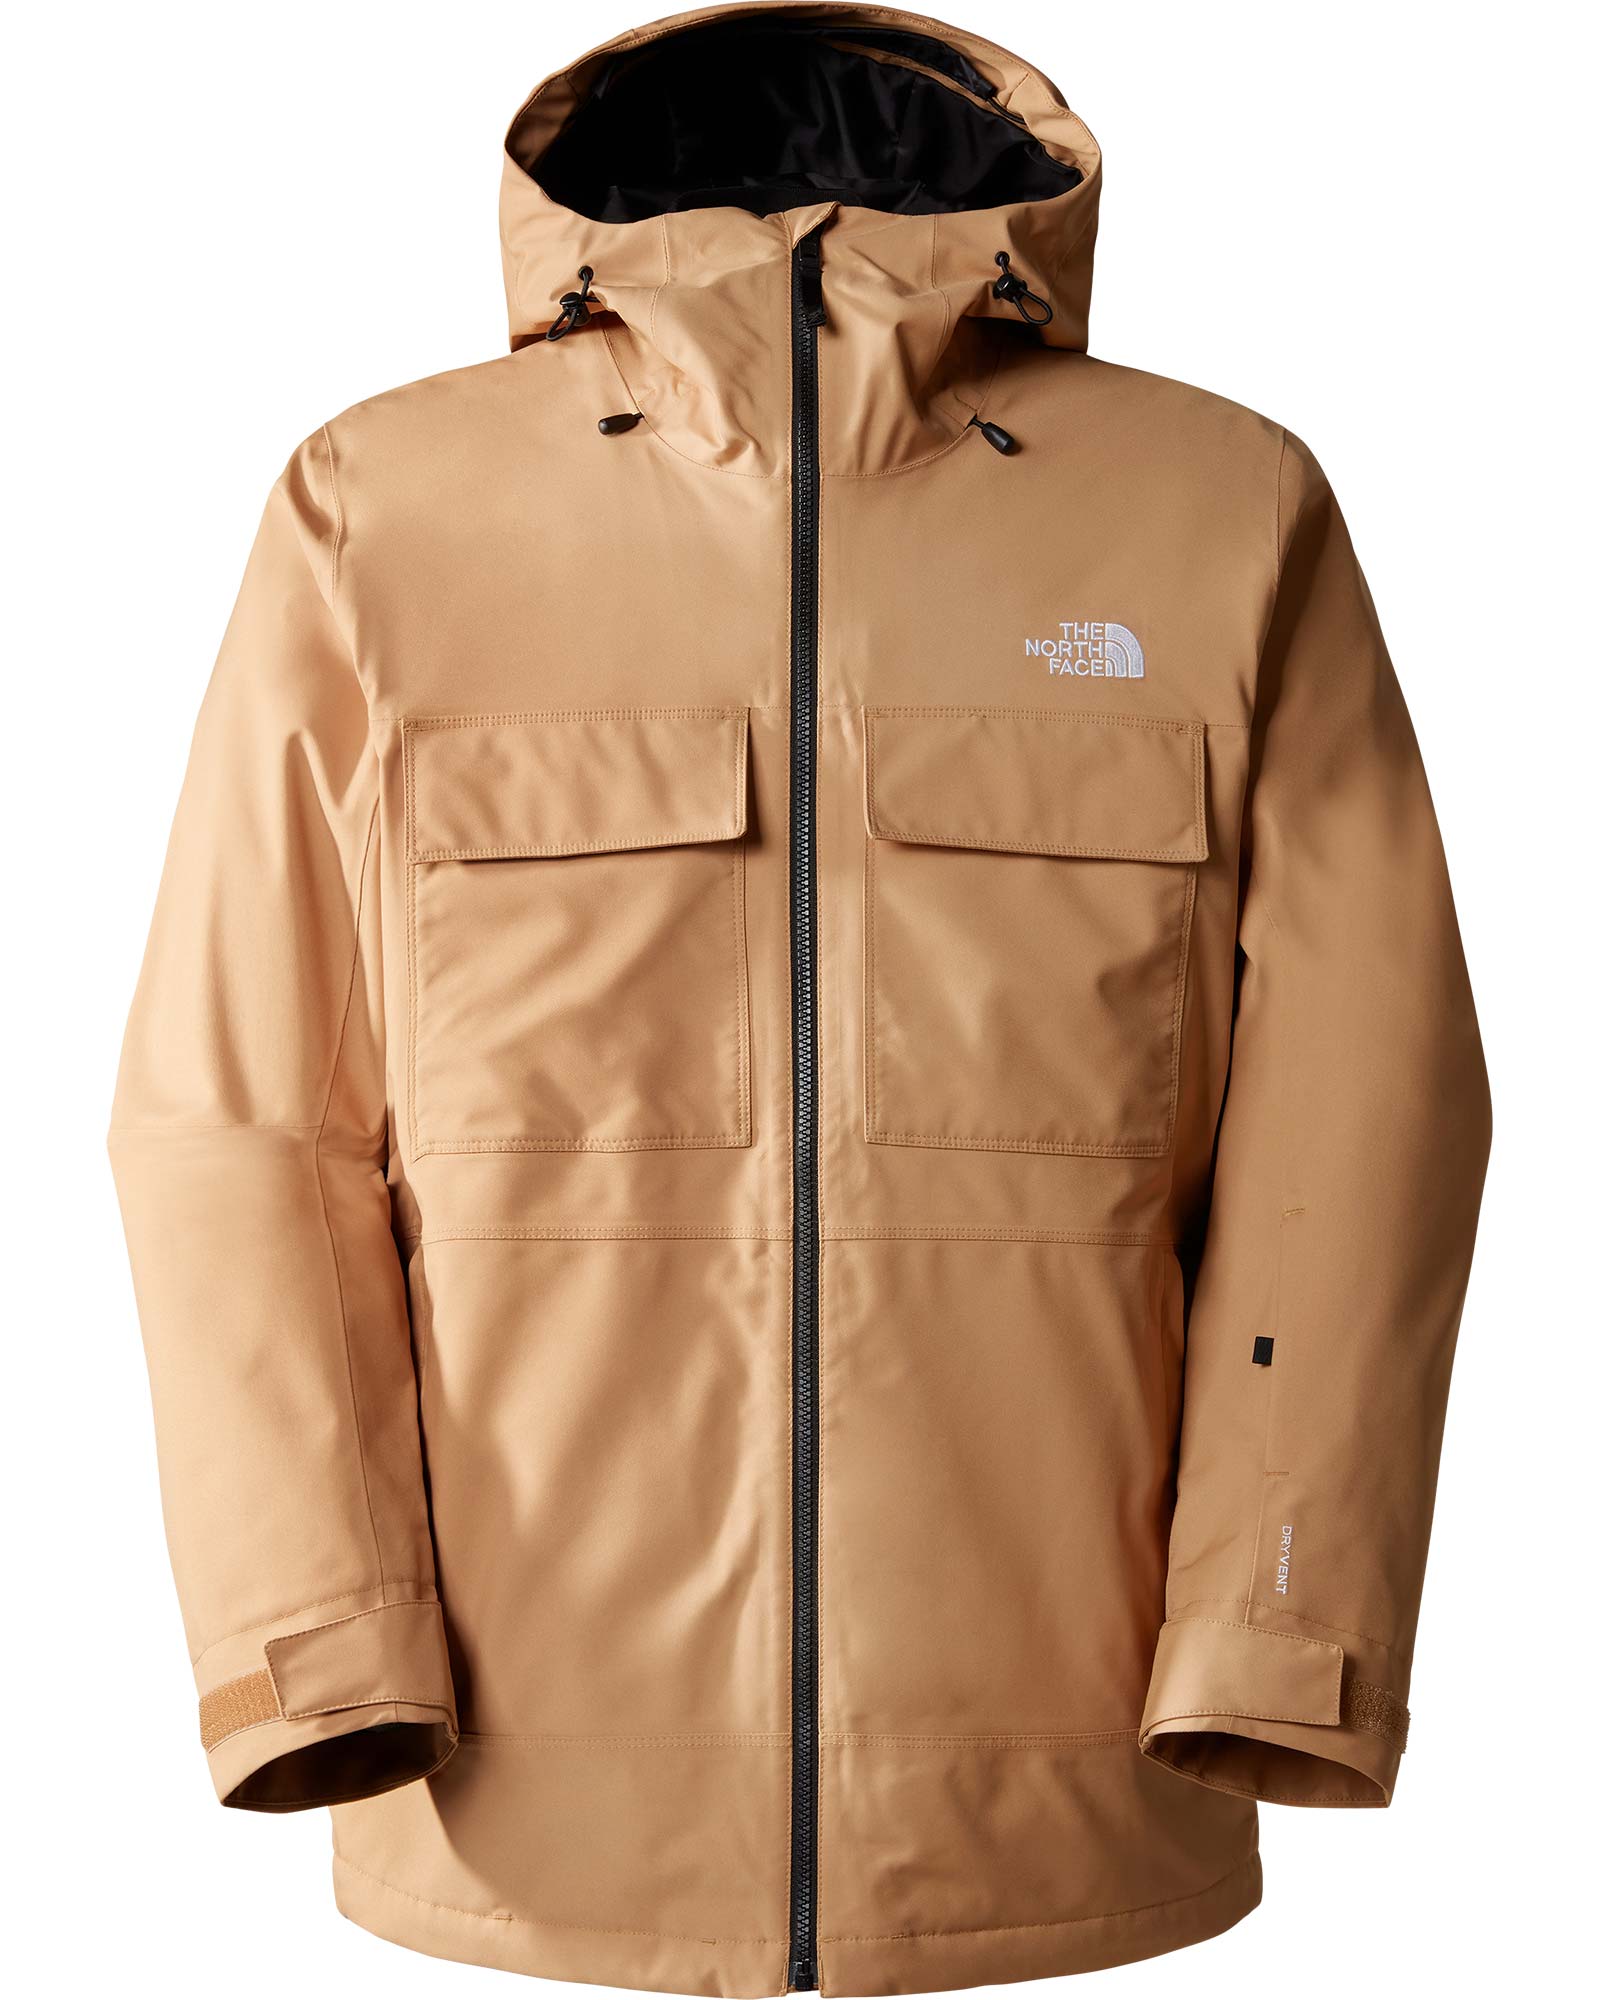 The North Face Men’s Fourbarrel Triclimate Jacket - Almond Butter/TNF Black XXL